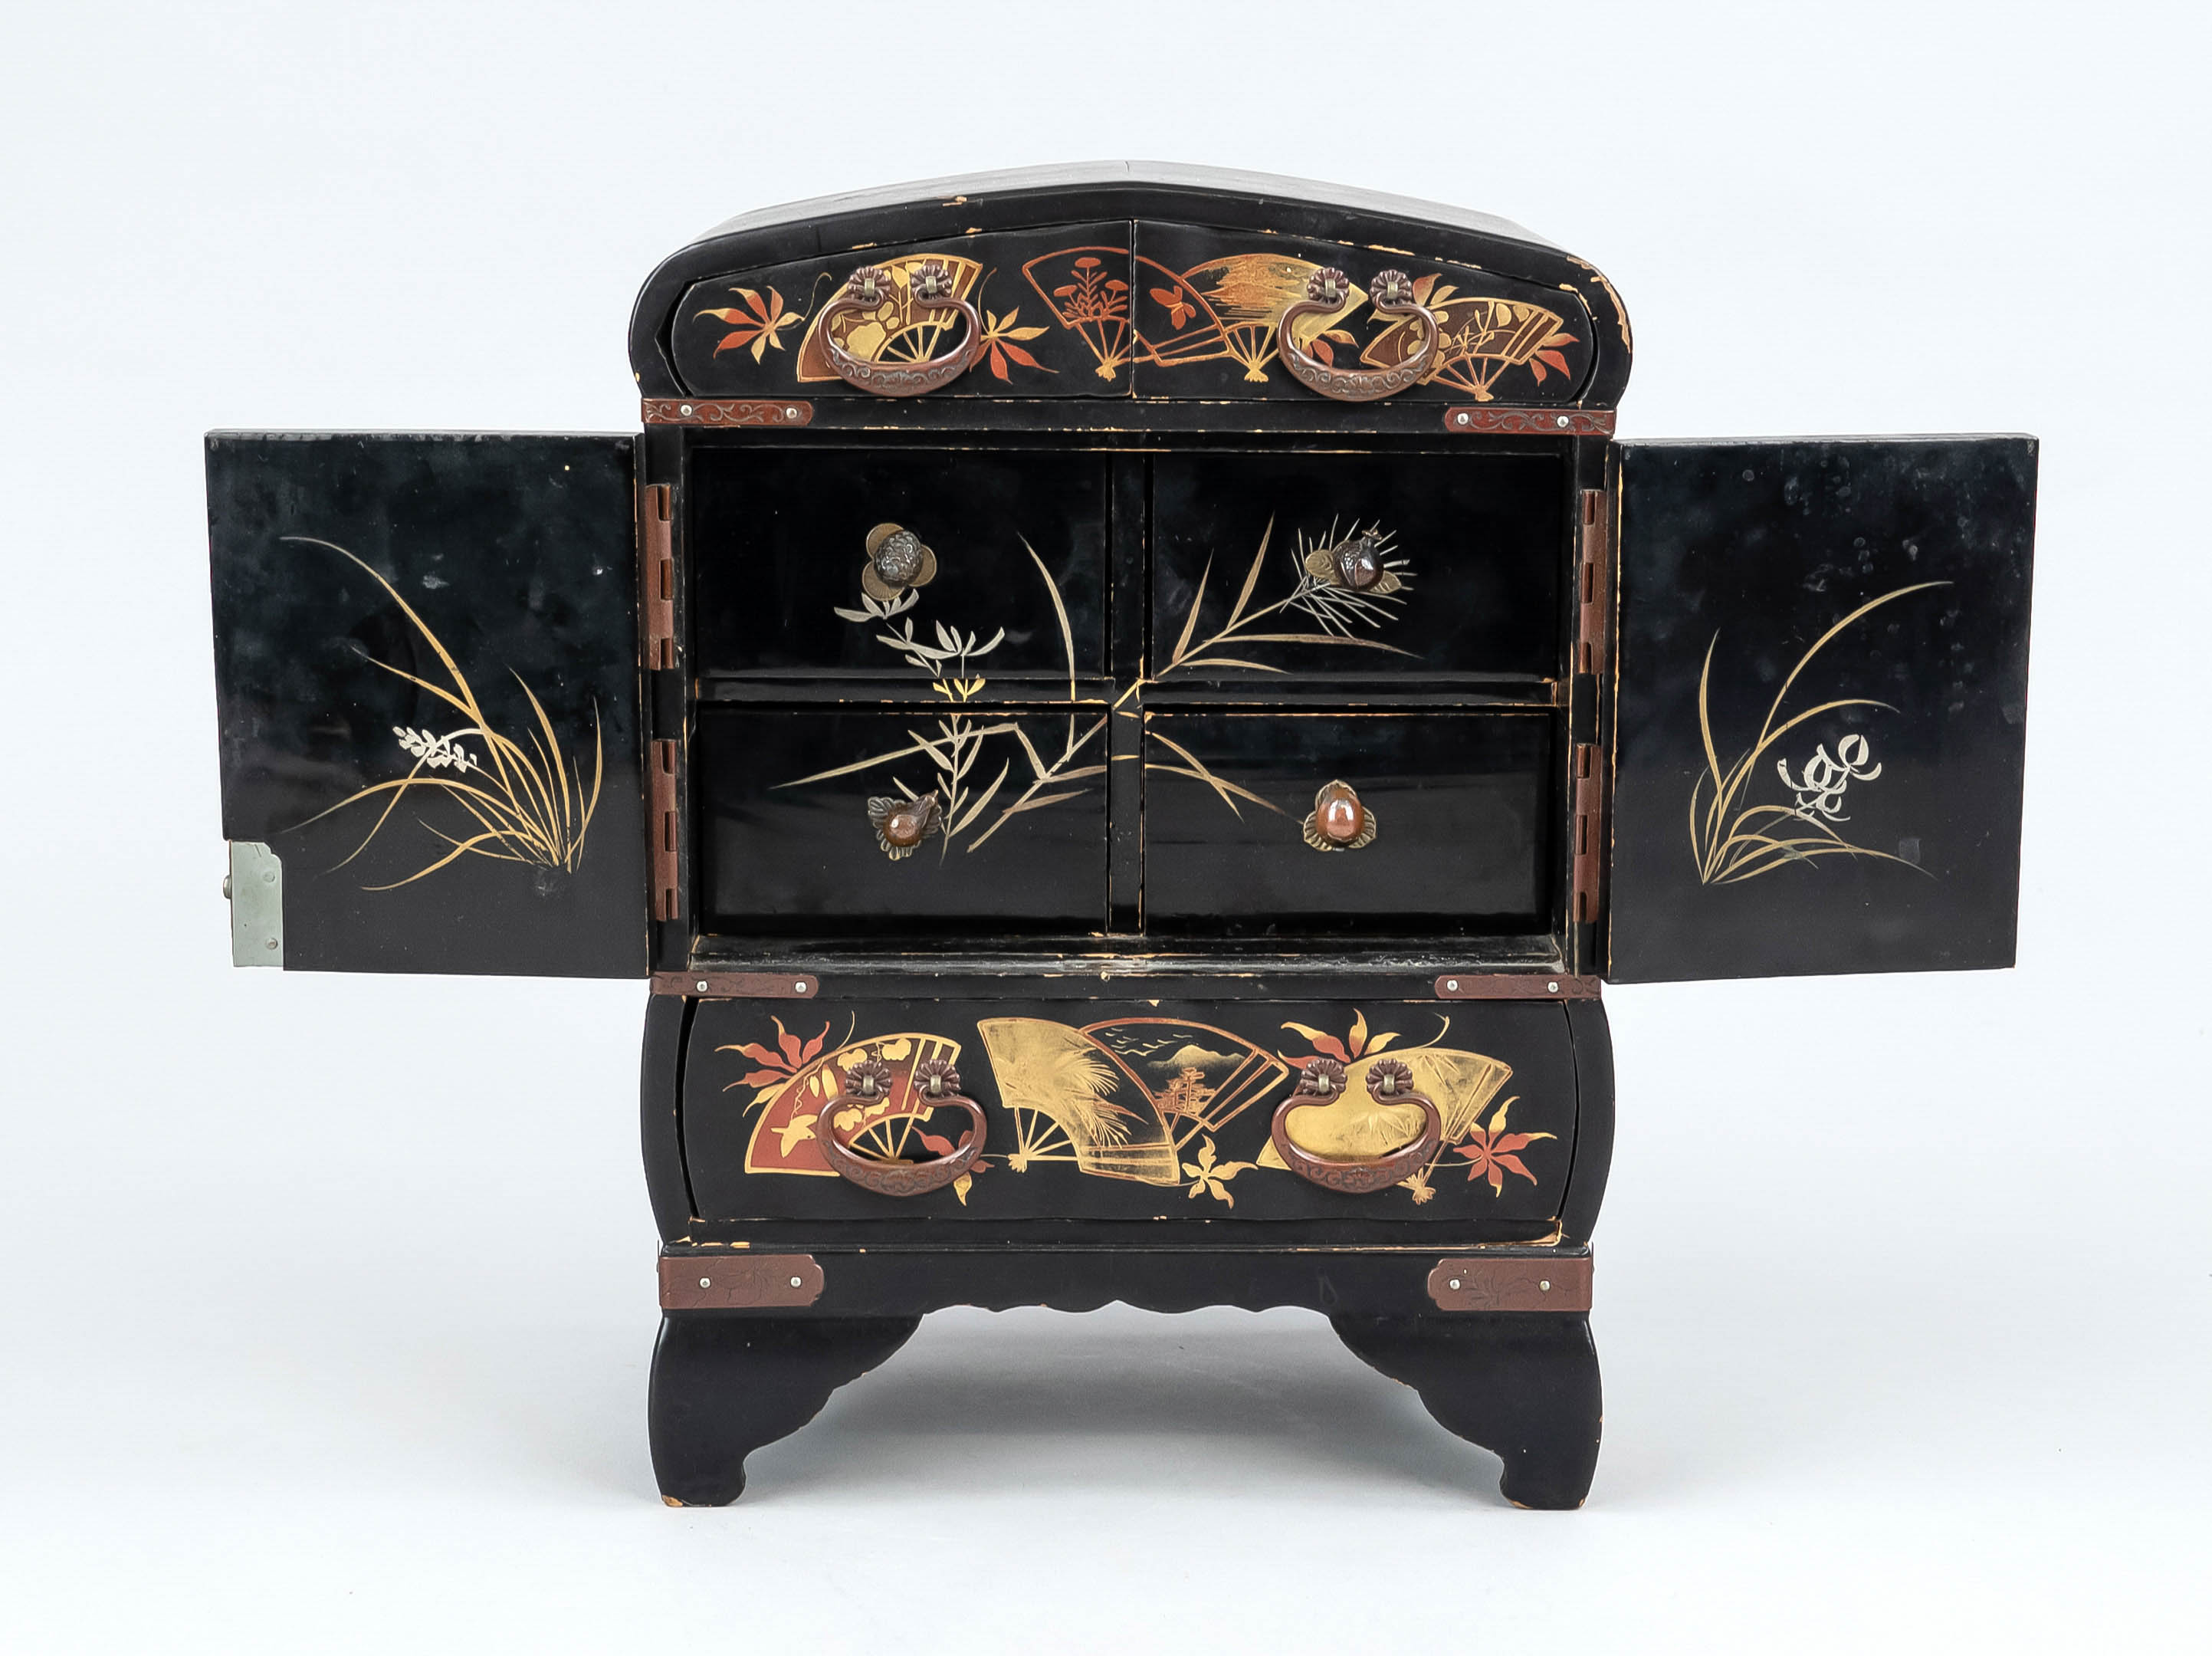 Black lacquer box, Japan, mid-century, black lacquer with gold and red lacquer print of cranes - Image 2 of 2